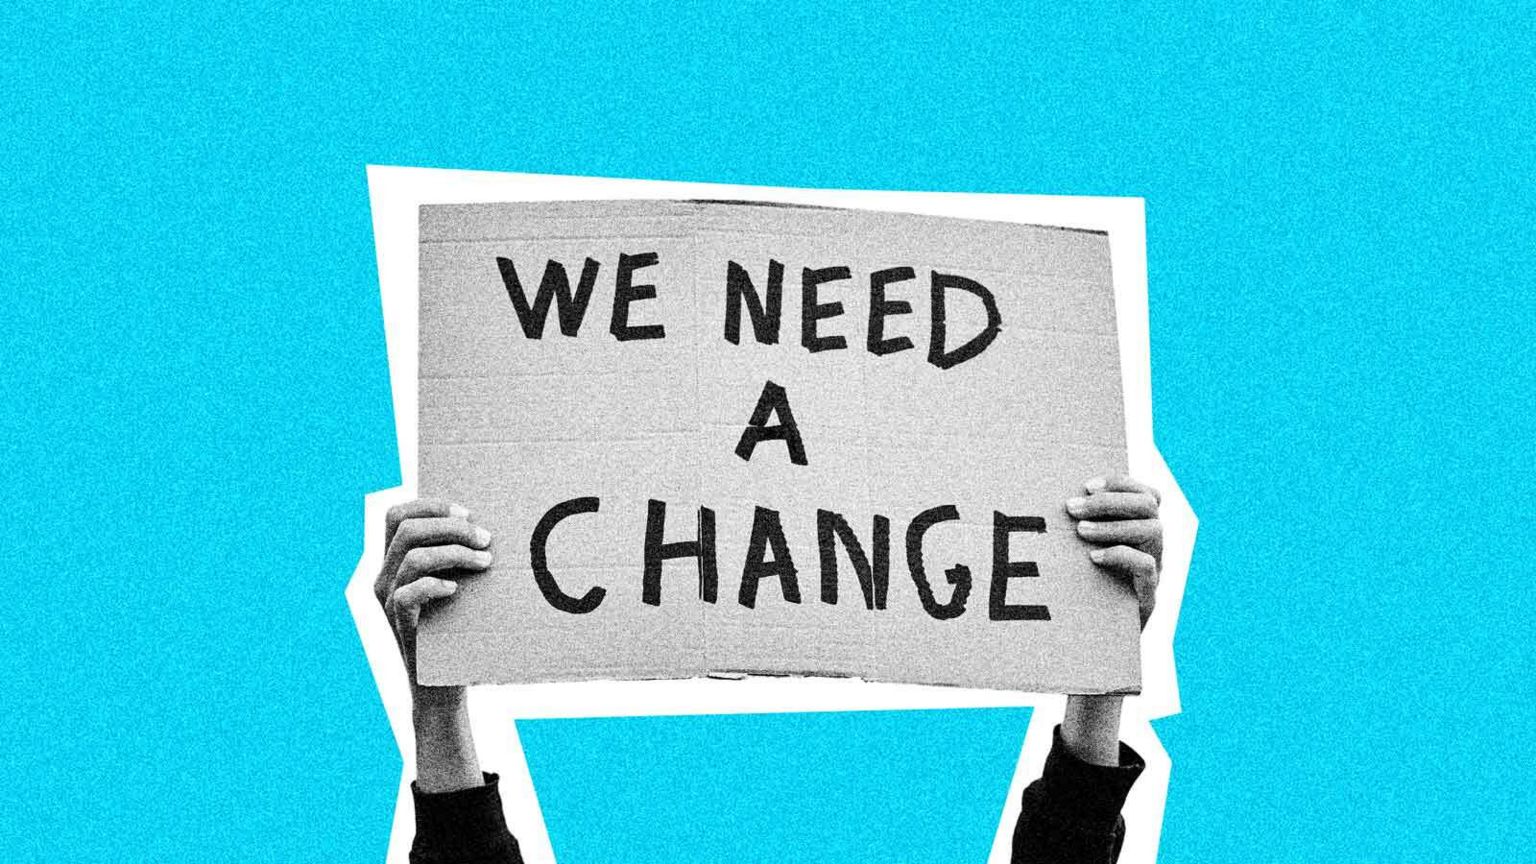 A pair of hands hold up a hand-written sign reading "we need a change" set against a bright blue background